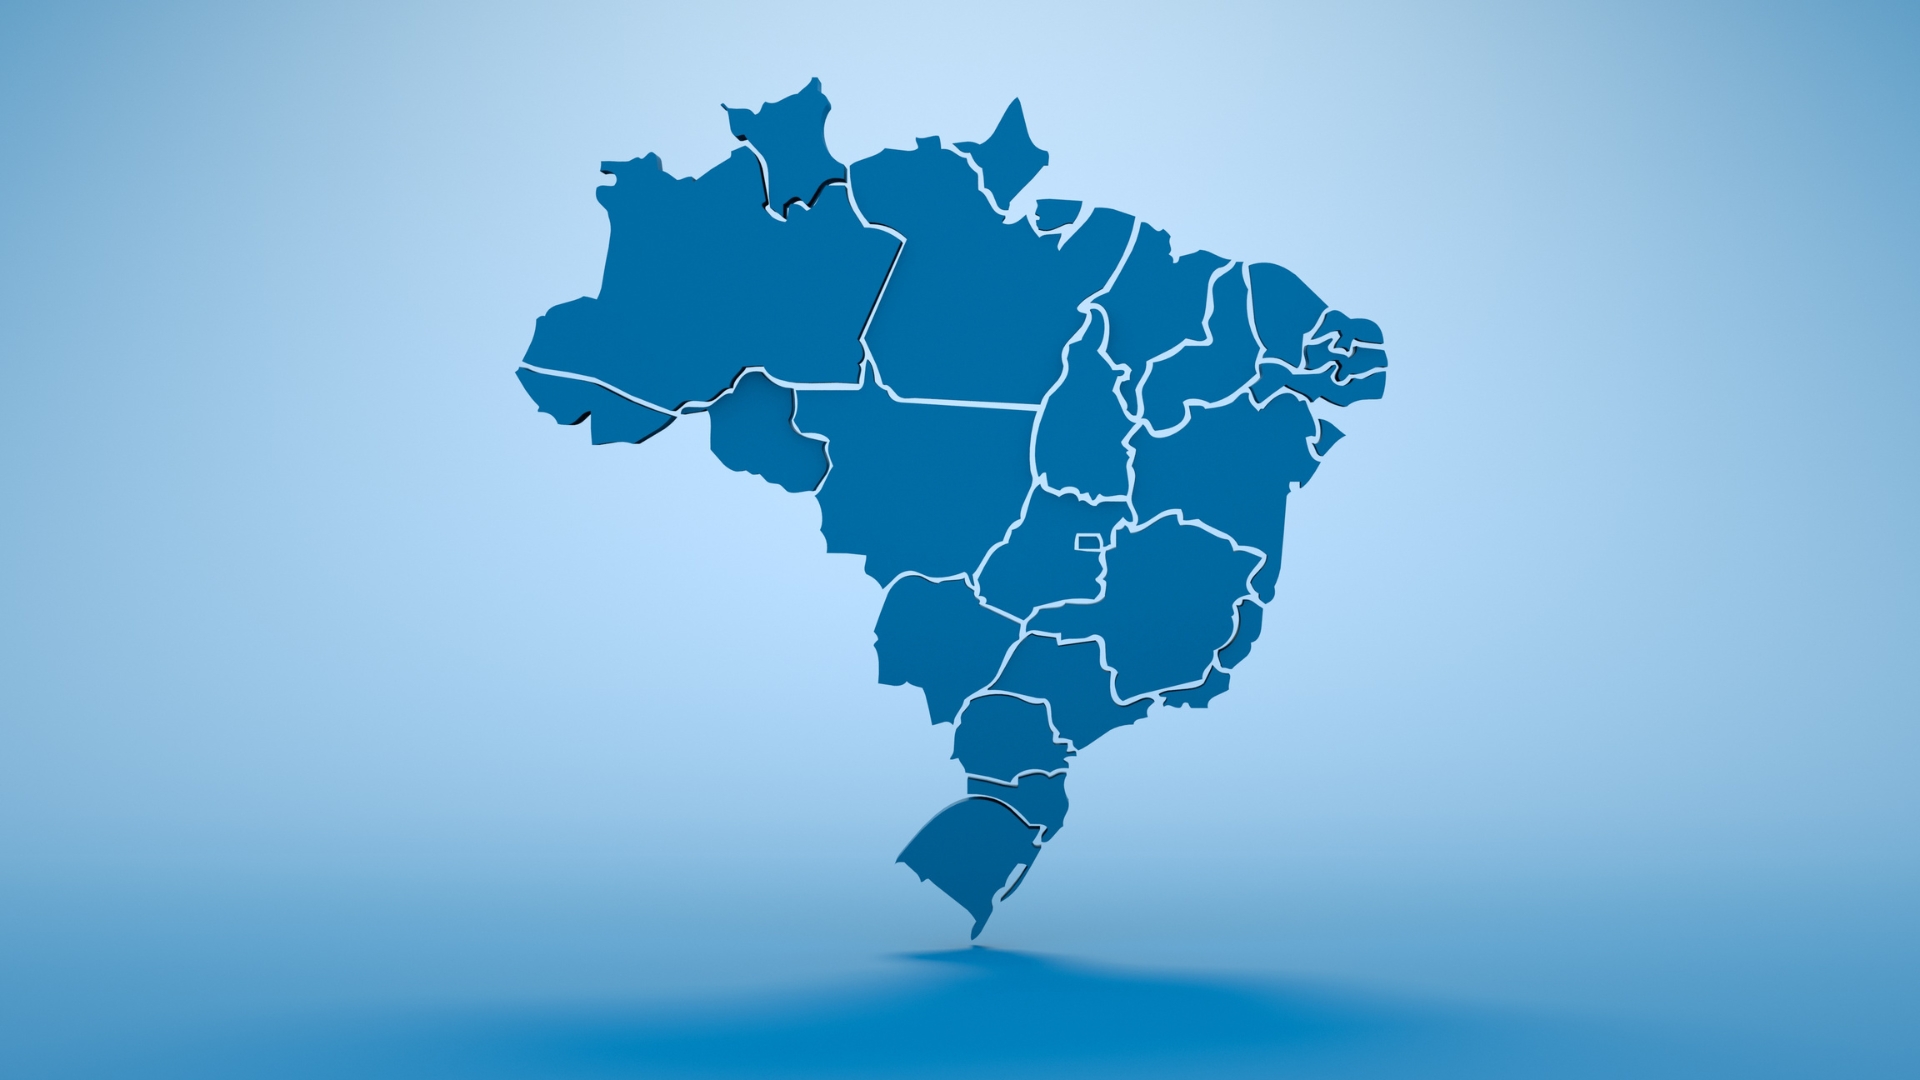 A list of the most miserable countries in the world has been released (Brazil is on the list)